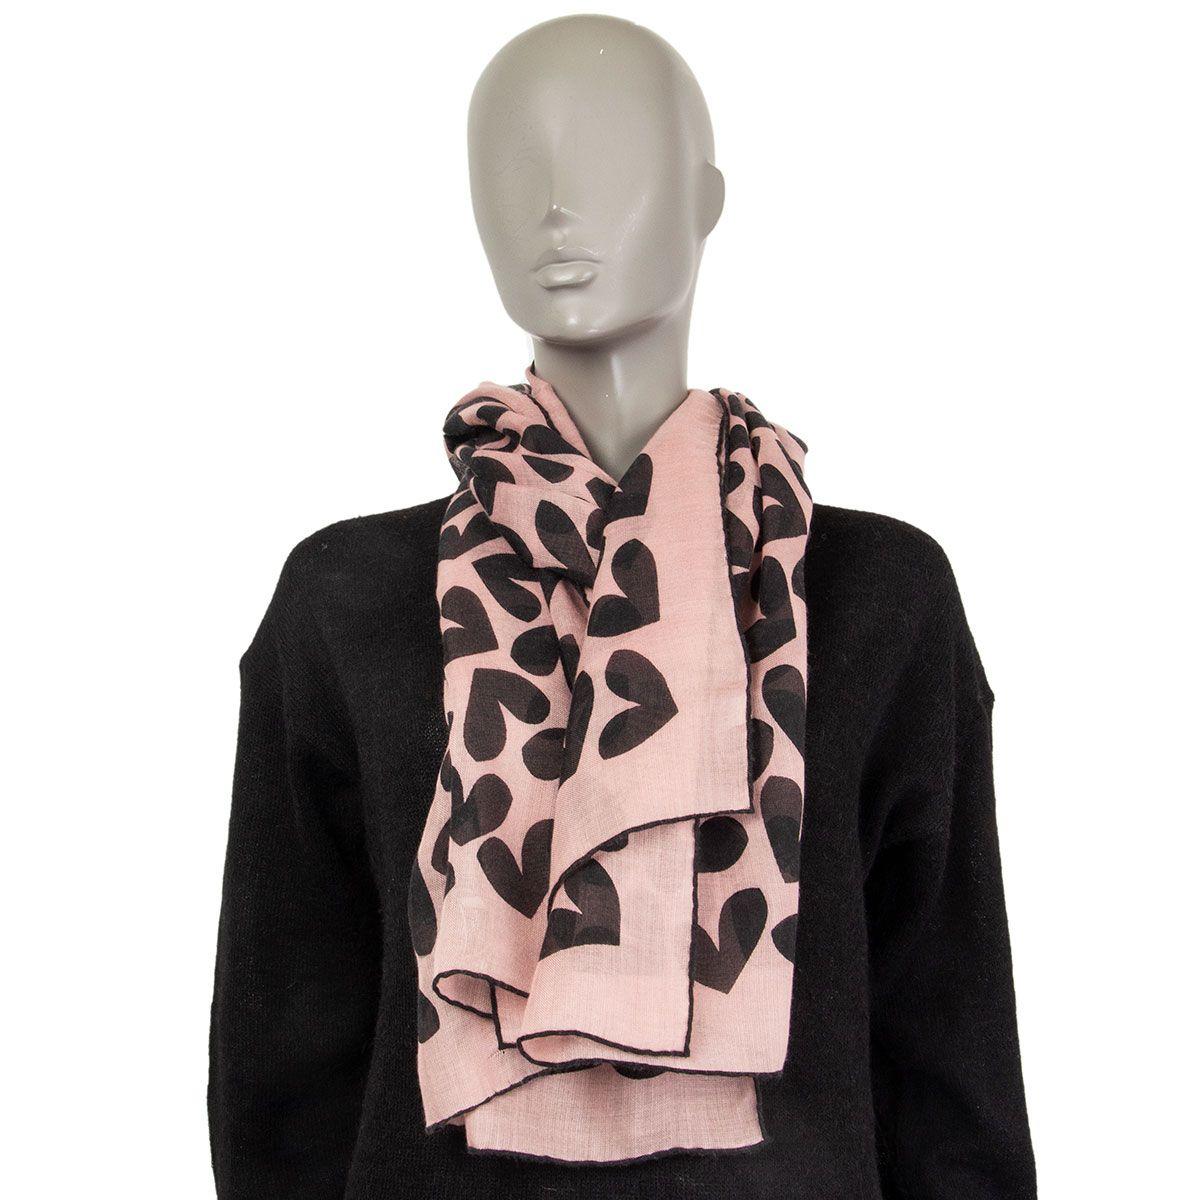 authentic Saint Laurent sheer heart-print shawl in blush pink and black cashmere (65%) and silk (35%). Has been worn with one pulled thread. Overall in very good condition. 

Width 200cm (78in)
Length 65cm (25.4in)